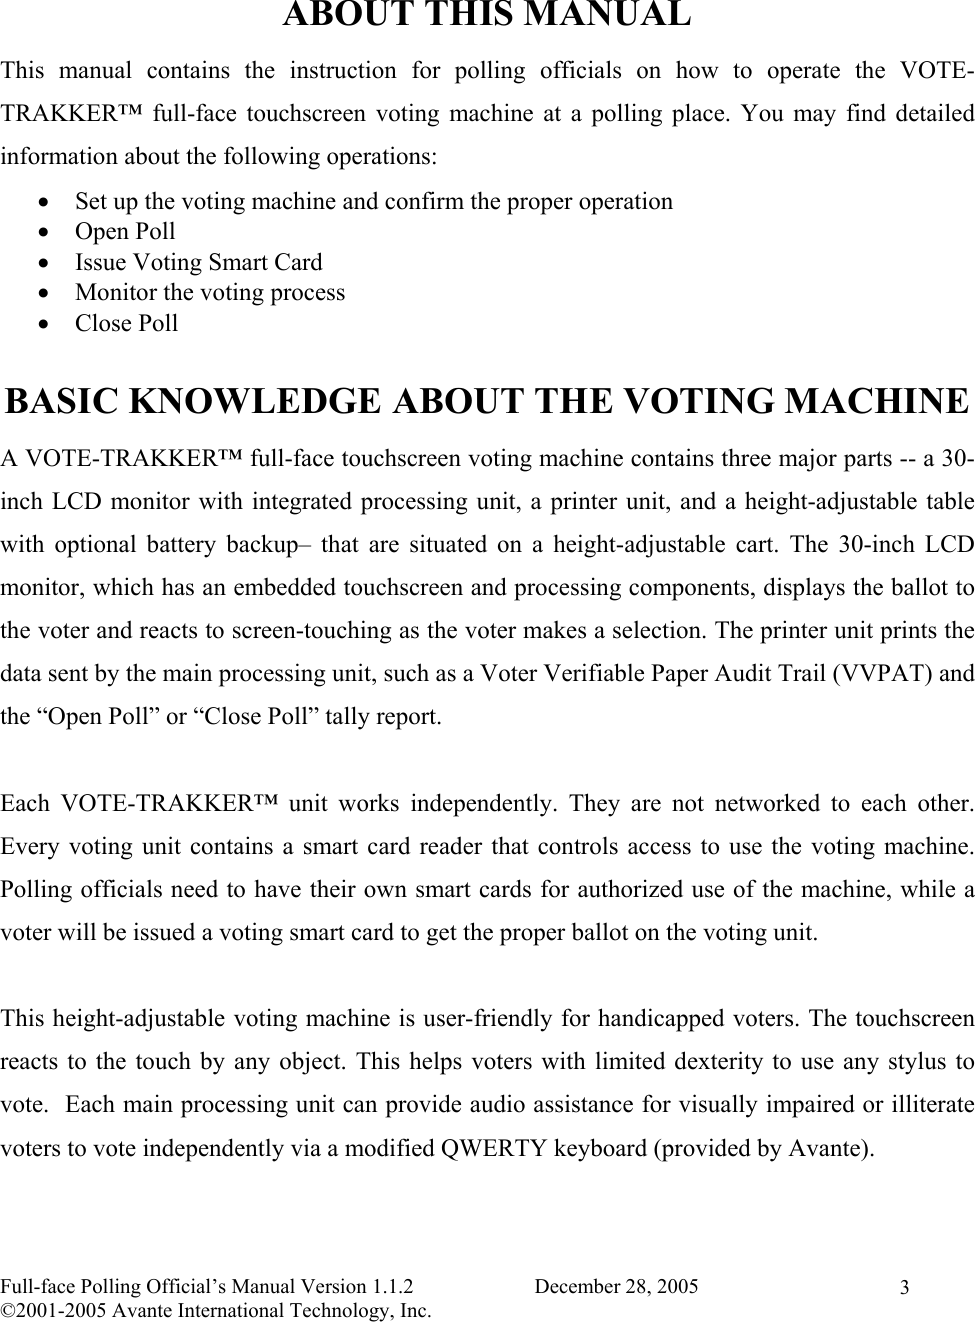    Full-face Polling Official’s Manual Version 1.1.2                       December 28, 2005 ©2001-2005 Avante International Technology, Inc.   3 ABOUT THIS MANUAL This manual contains the instruction for polling officials on how to operate the VOTE-TRAKKER™ full-face touchscreen voting machine at a polling place. You may find detailed information about the following operations: •  Set up the voting machine and confirm the proper operation •  Open Poll •  Issue Voting Smart Card •  Monitor the voting process •  Close Poll  BASIC KNOWLEDGE ABOUT THE VOTING MACHINE A VOTE-TRAKKER™ full-face touchscreen voting machine contains three major parts -- a 30-inch LCD monitor with integrated processing unit, a printer unit, and a height-adjustable table with optional battery backup– that are situated on a height-adjustable cart. The 30-inch LCD monitor, which has an embedded touchscreen and processing components, displays the ballot to the voter and reacts to screen-touching as the voter makes a selection. The printer unit prints the data sent by the main processing unit, such as a Voter Verifiable Paper Audit Trail (VVPAT) and the “Open Poll” or “Close Poll” tally report.  Each VOTE-TRAKKER™ unit works independently. They are not networked to each other. Every voting unit contains a smart card reader that controls access to use the voting machine. Polling officials need to have their own smart cards for authorized use of the machine, while a voter will be issued a voting smart card to get the proper ballot on the voting unit.   This height-adjustable voting machine is user-friendly for handicapped voters. The touchscreen reacts to the touch by any object. This helps voters with limited dexterity to use any stylus to vote.  Each main processing unit can provide audio assistance for visually impaired or illiterate voters to vote independently via a modified QWERTY keyboard (provided by Avante). 